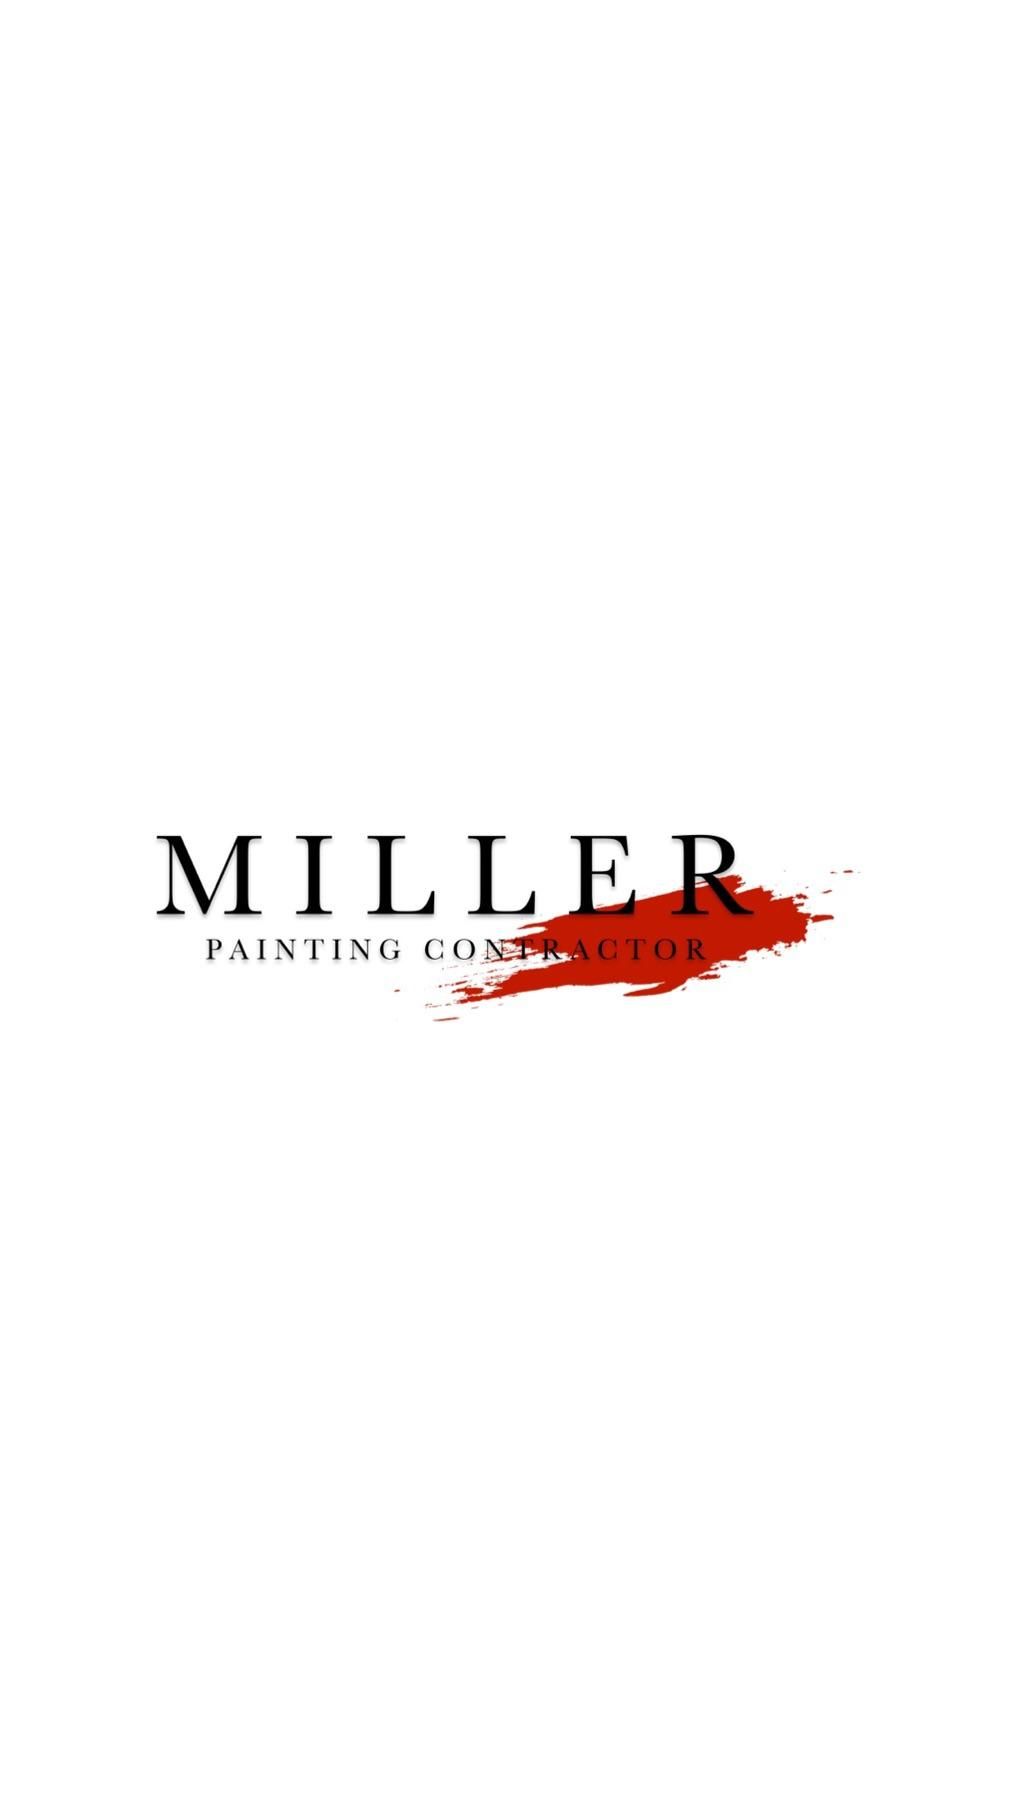 Miller Painting and Contracting